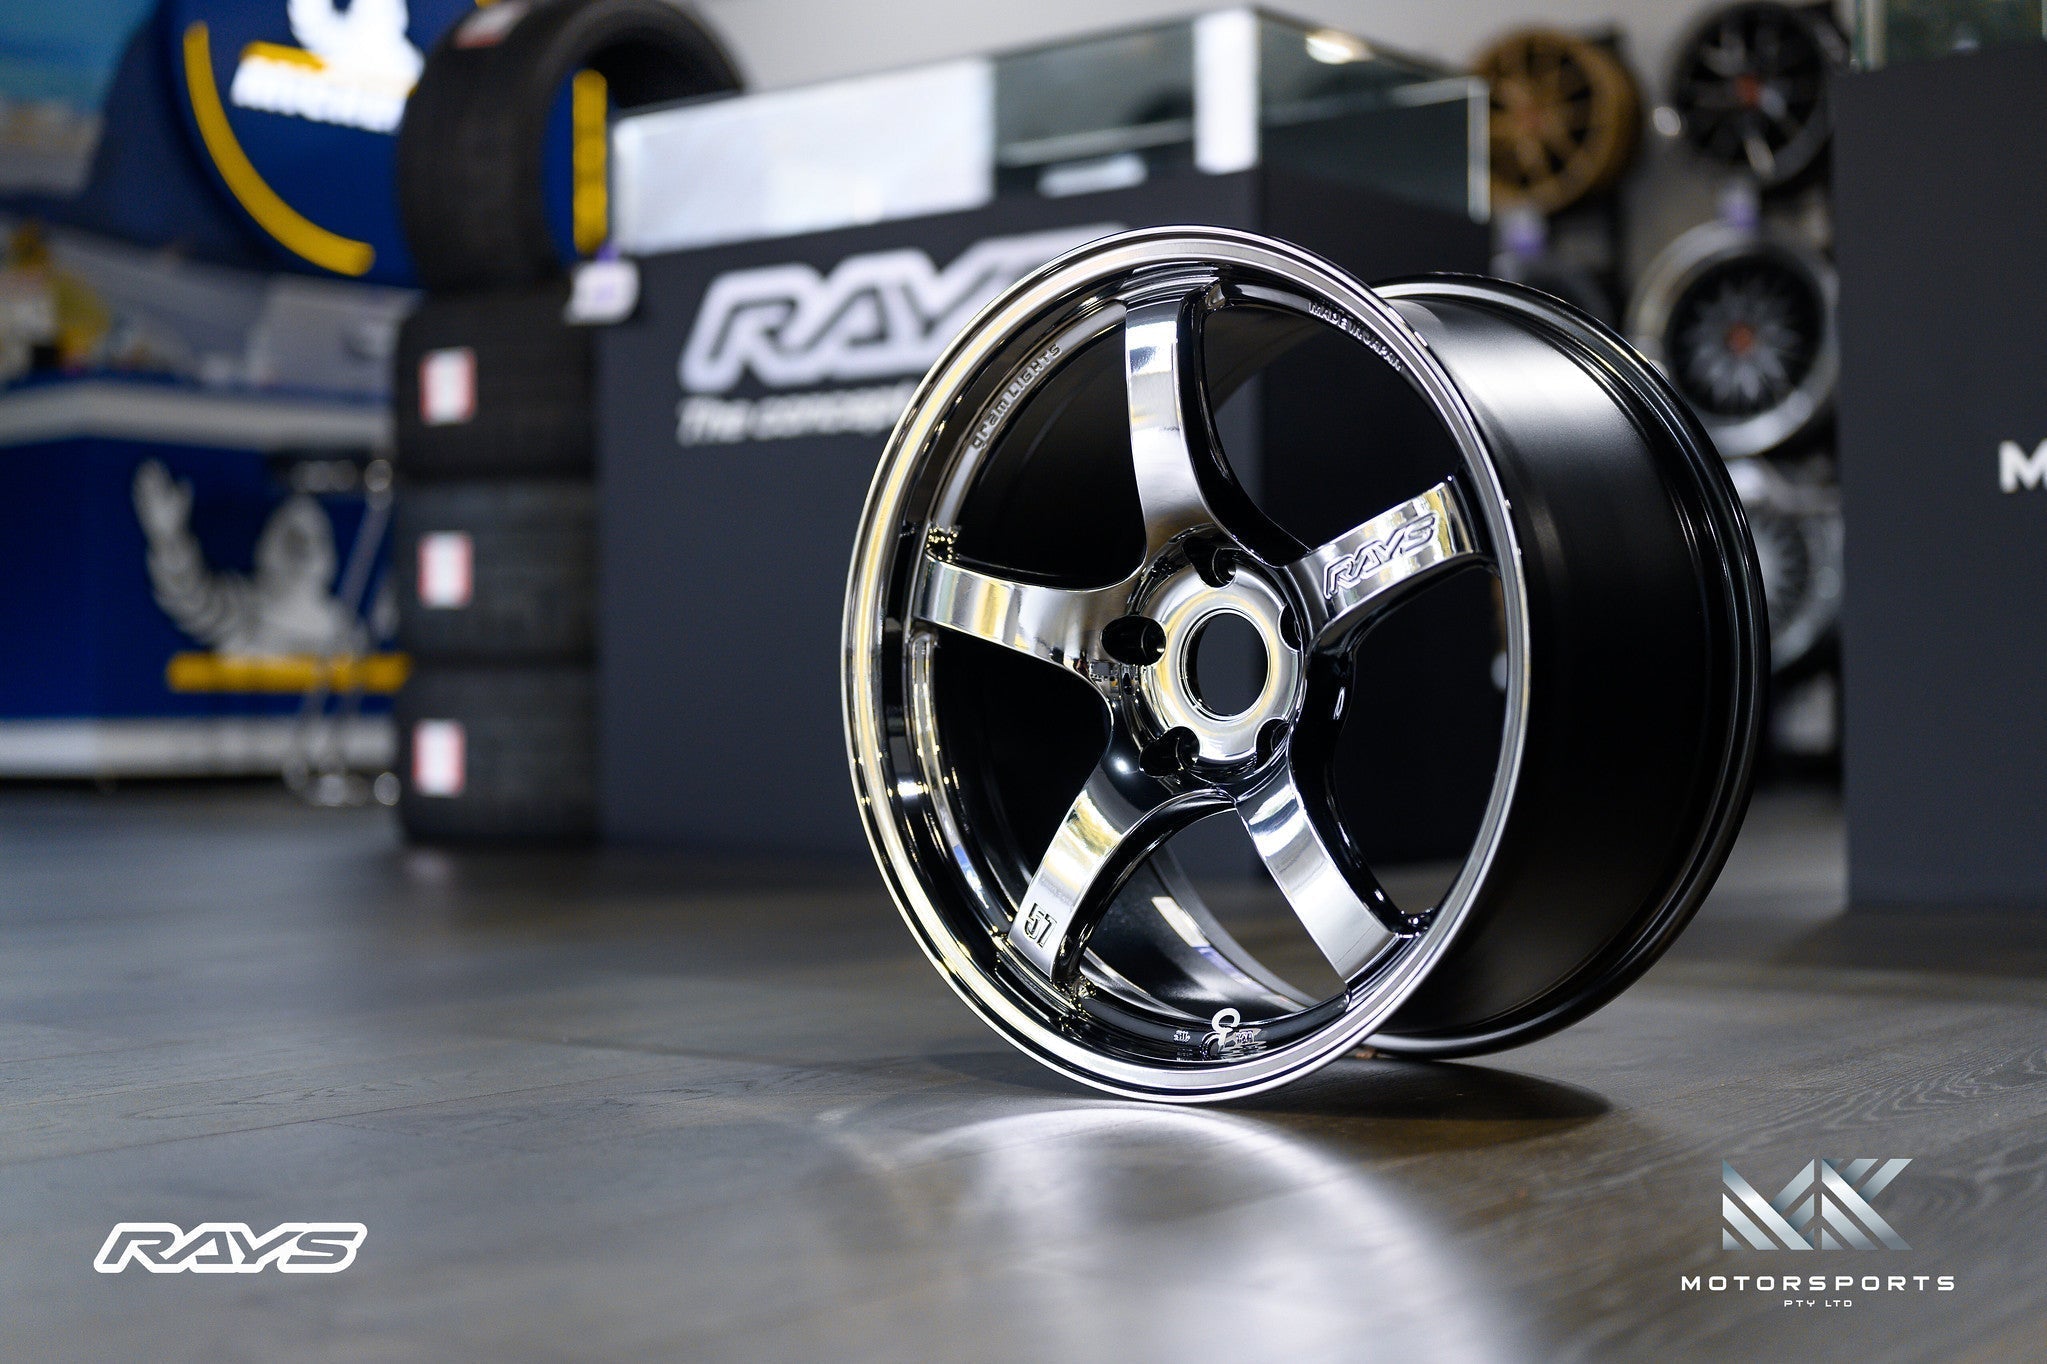 gramLIGHTS 57CR 18" Single Units - Premium Wheels from Gram Lights - From just $623! Shop now at MK MOTORSPORTS